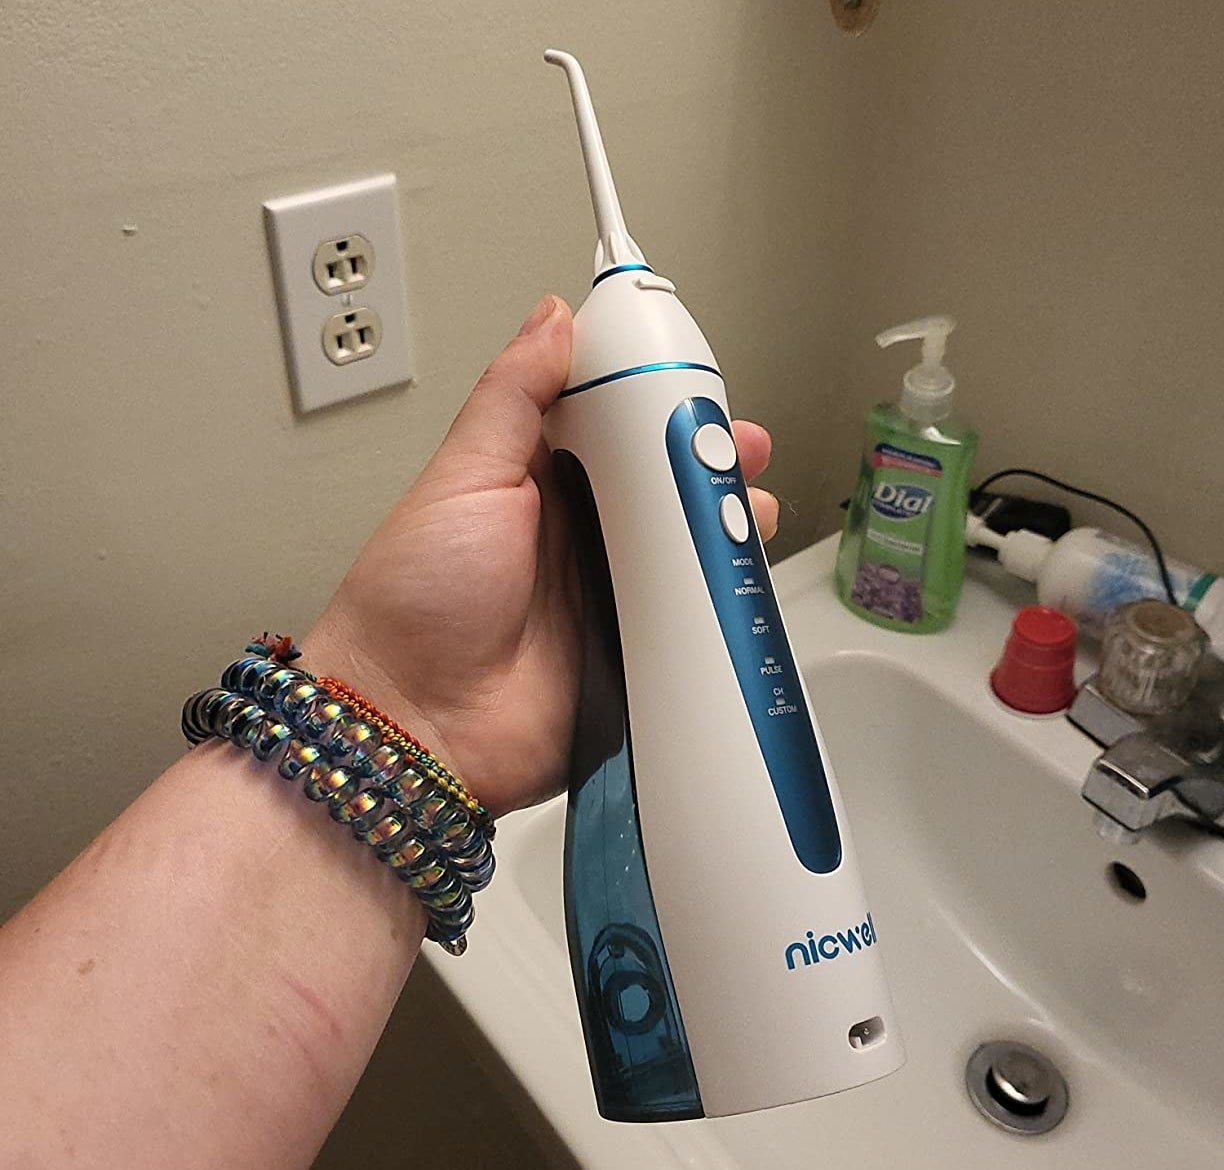 Reviewer holding the white cordless water dental flosser above bathroom sink